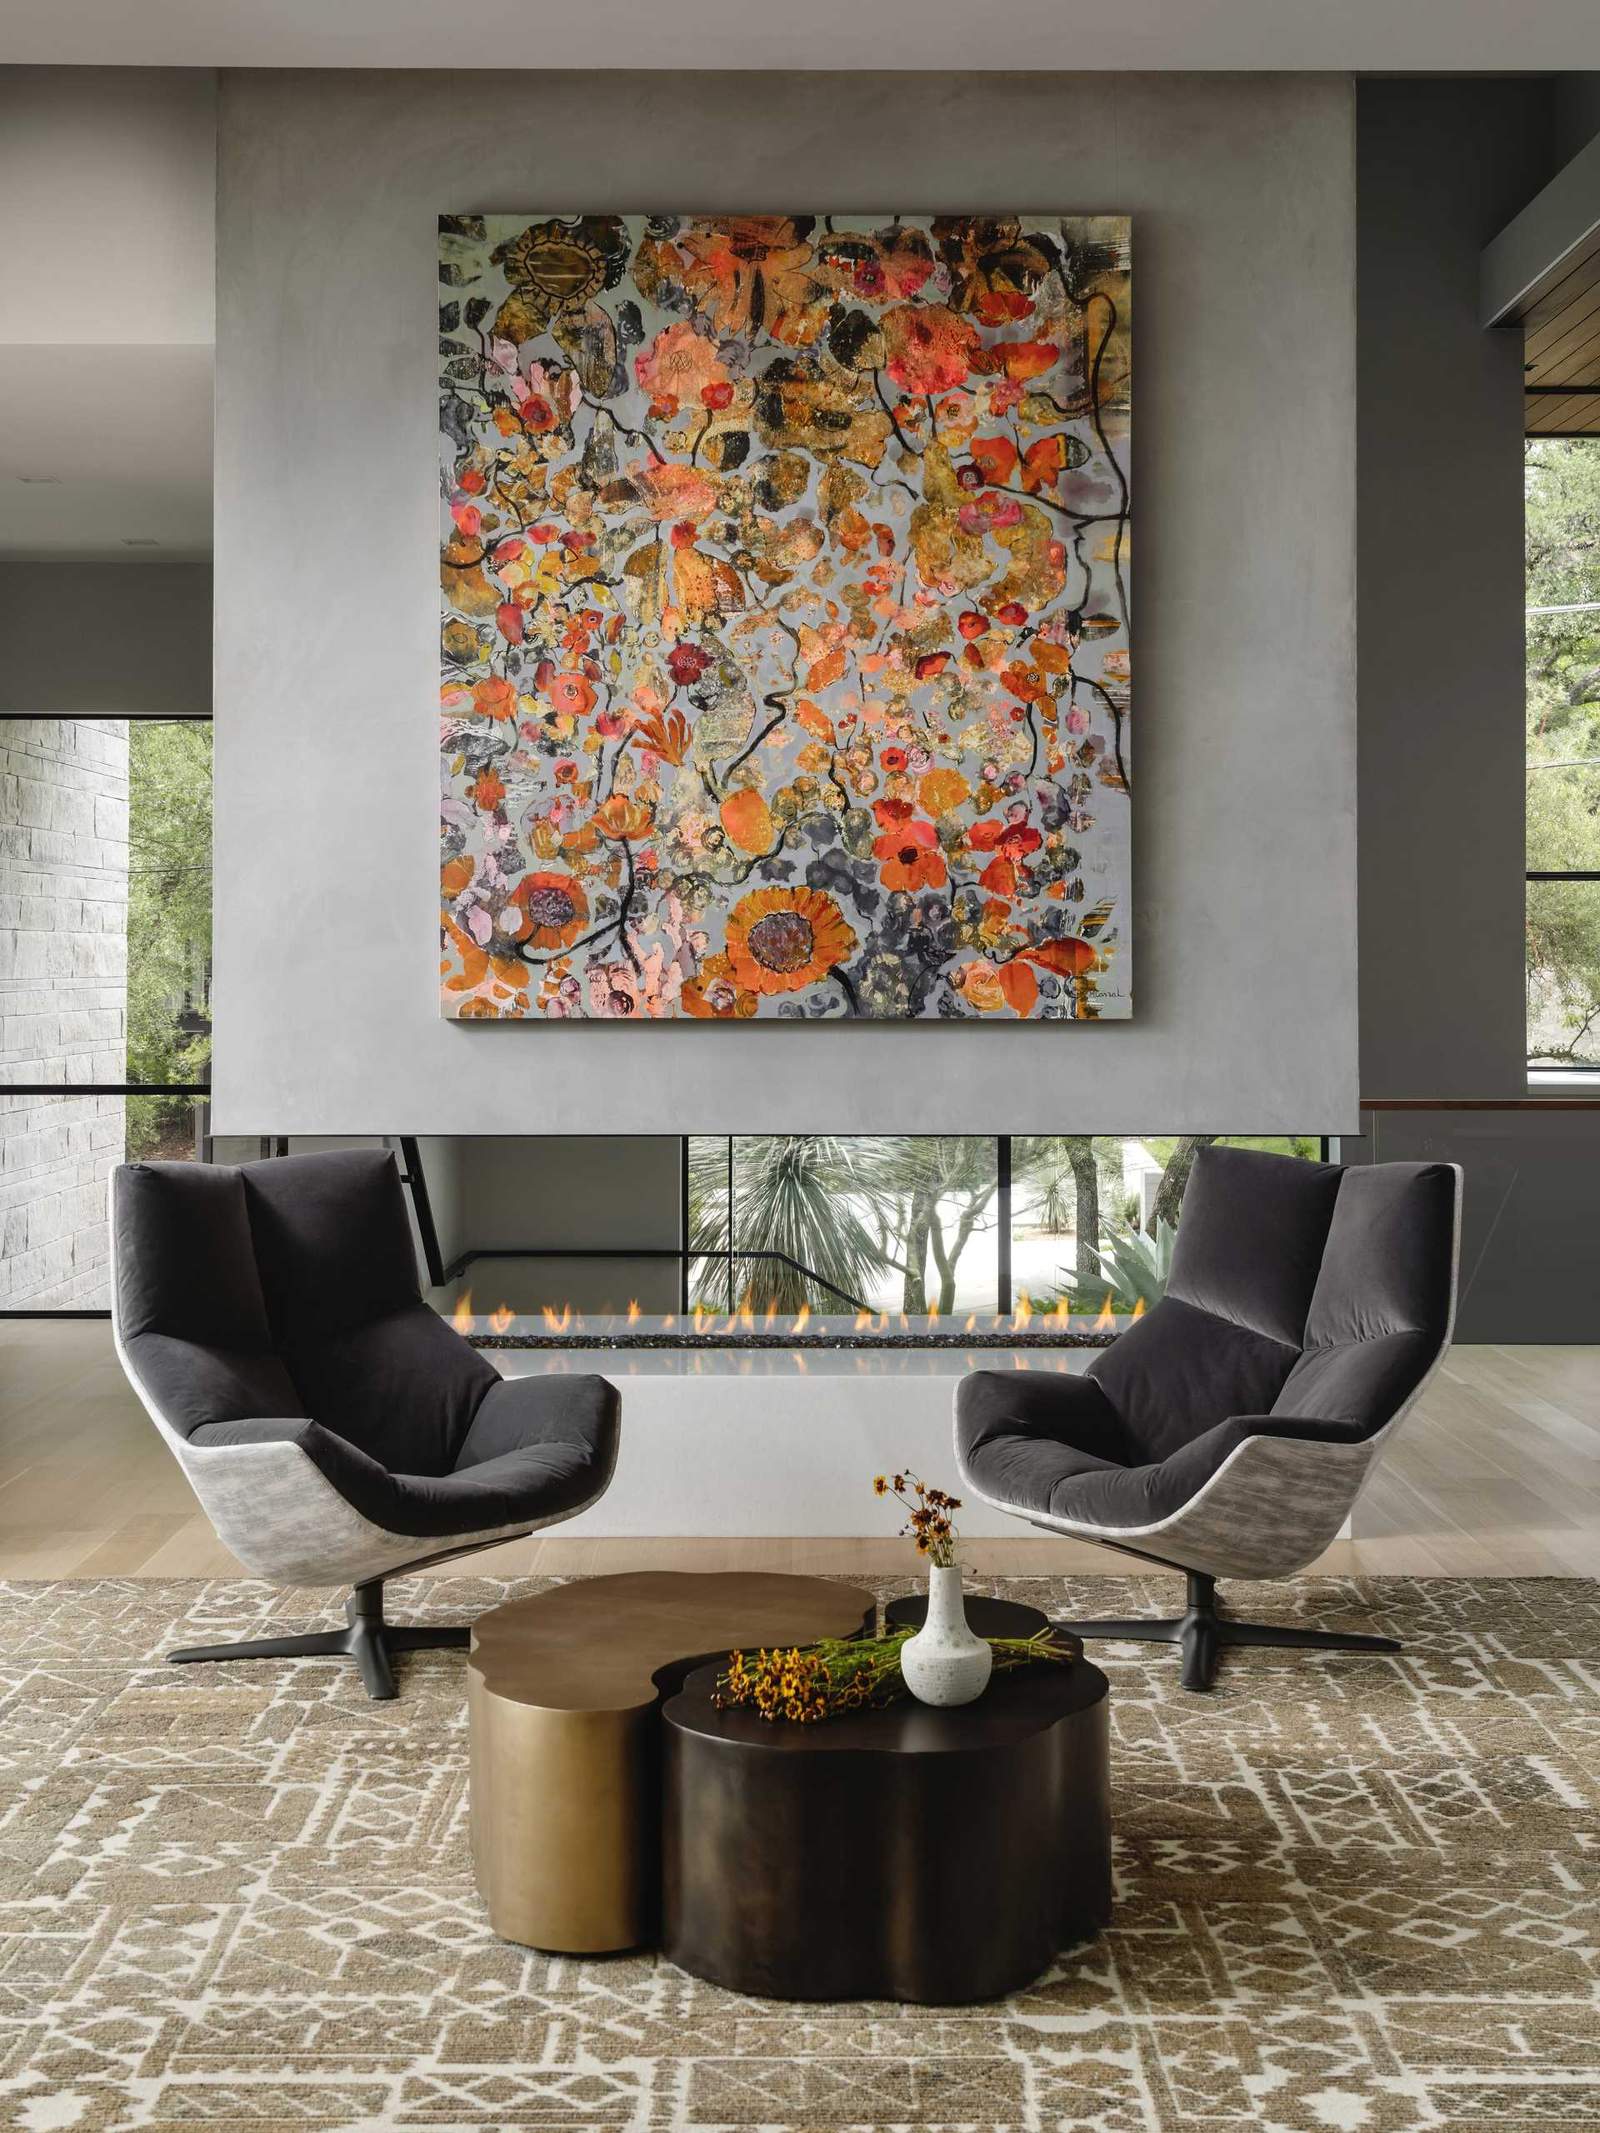 A modern fireplace with a large colorful artwork above.